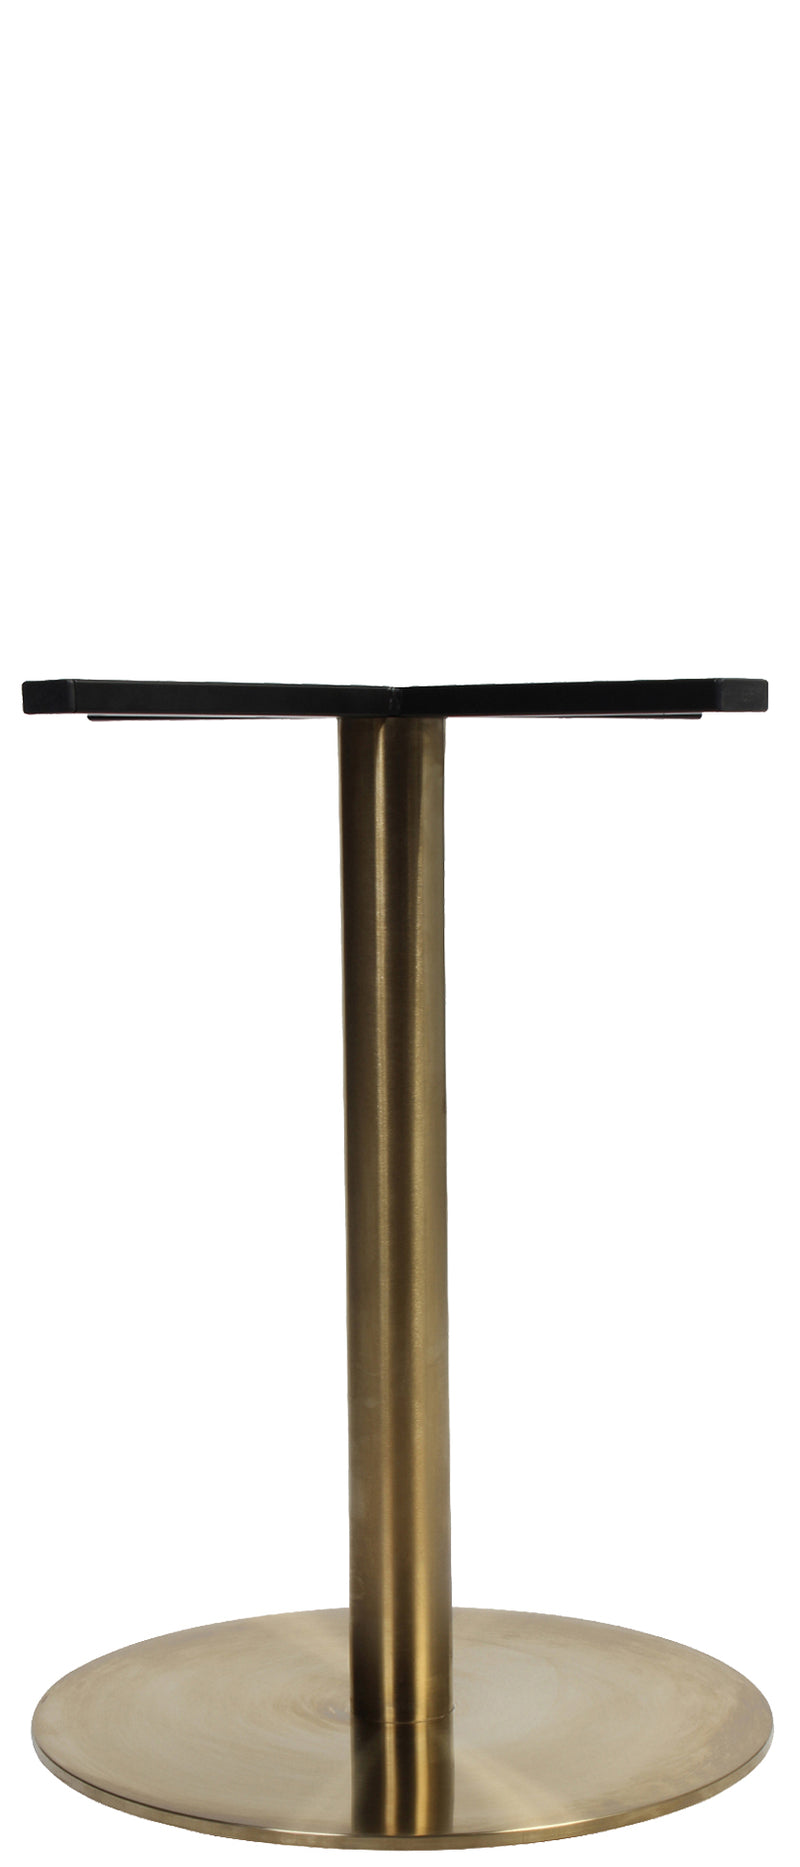 1 x Brass Colorado - Round Table Base, Table Bases - Sketch Commercial Hospitality Furniture